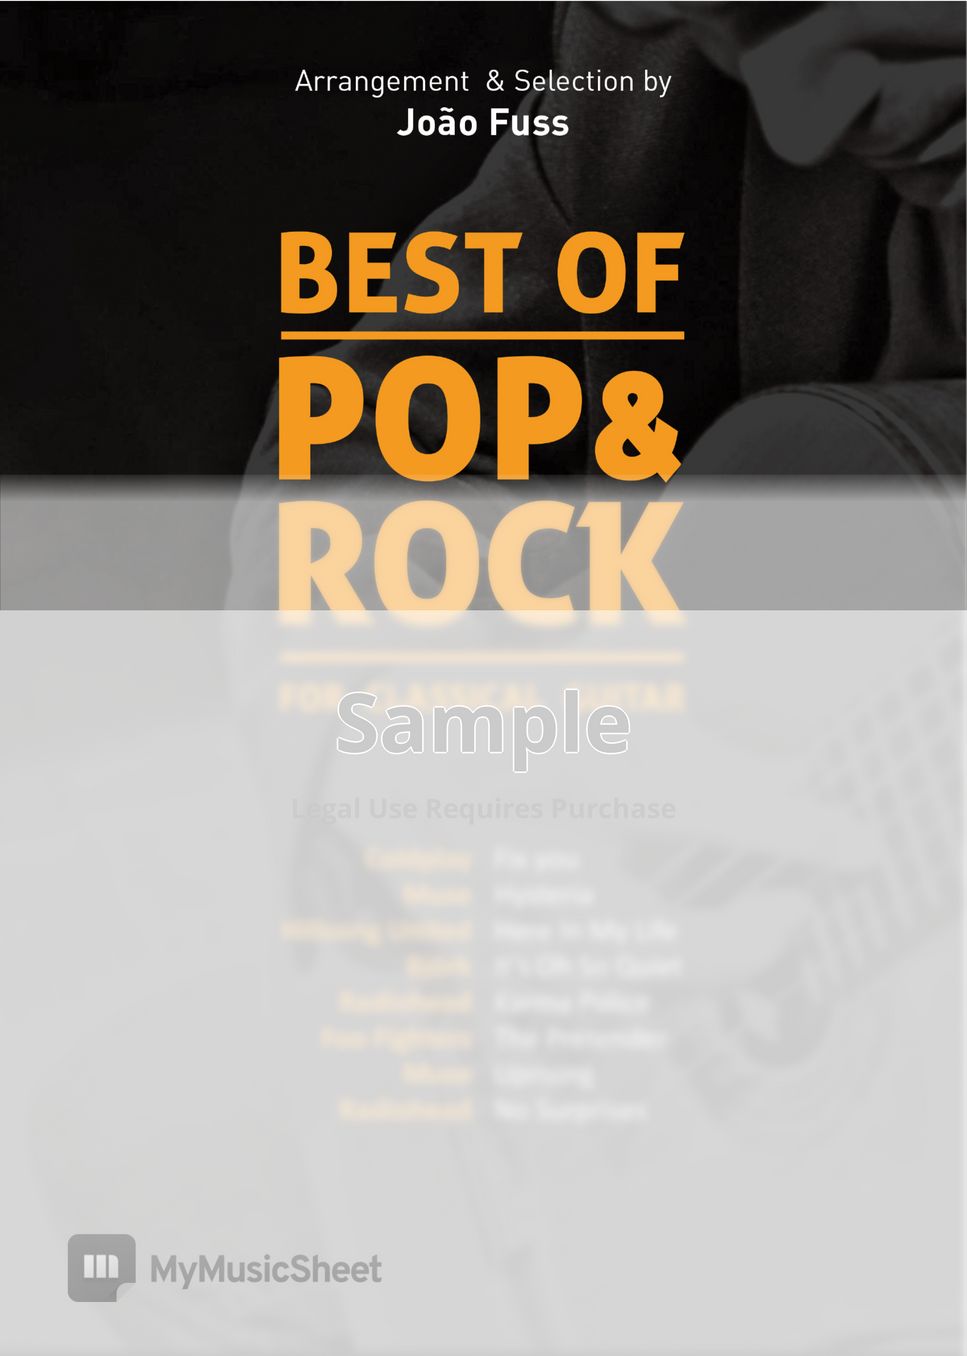 Karma Police - Radiohead - The Best of Pop/Rock for Classical Guitar by João Fuss